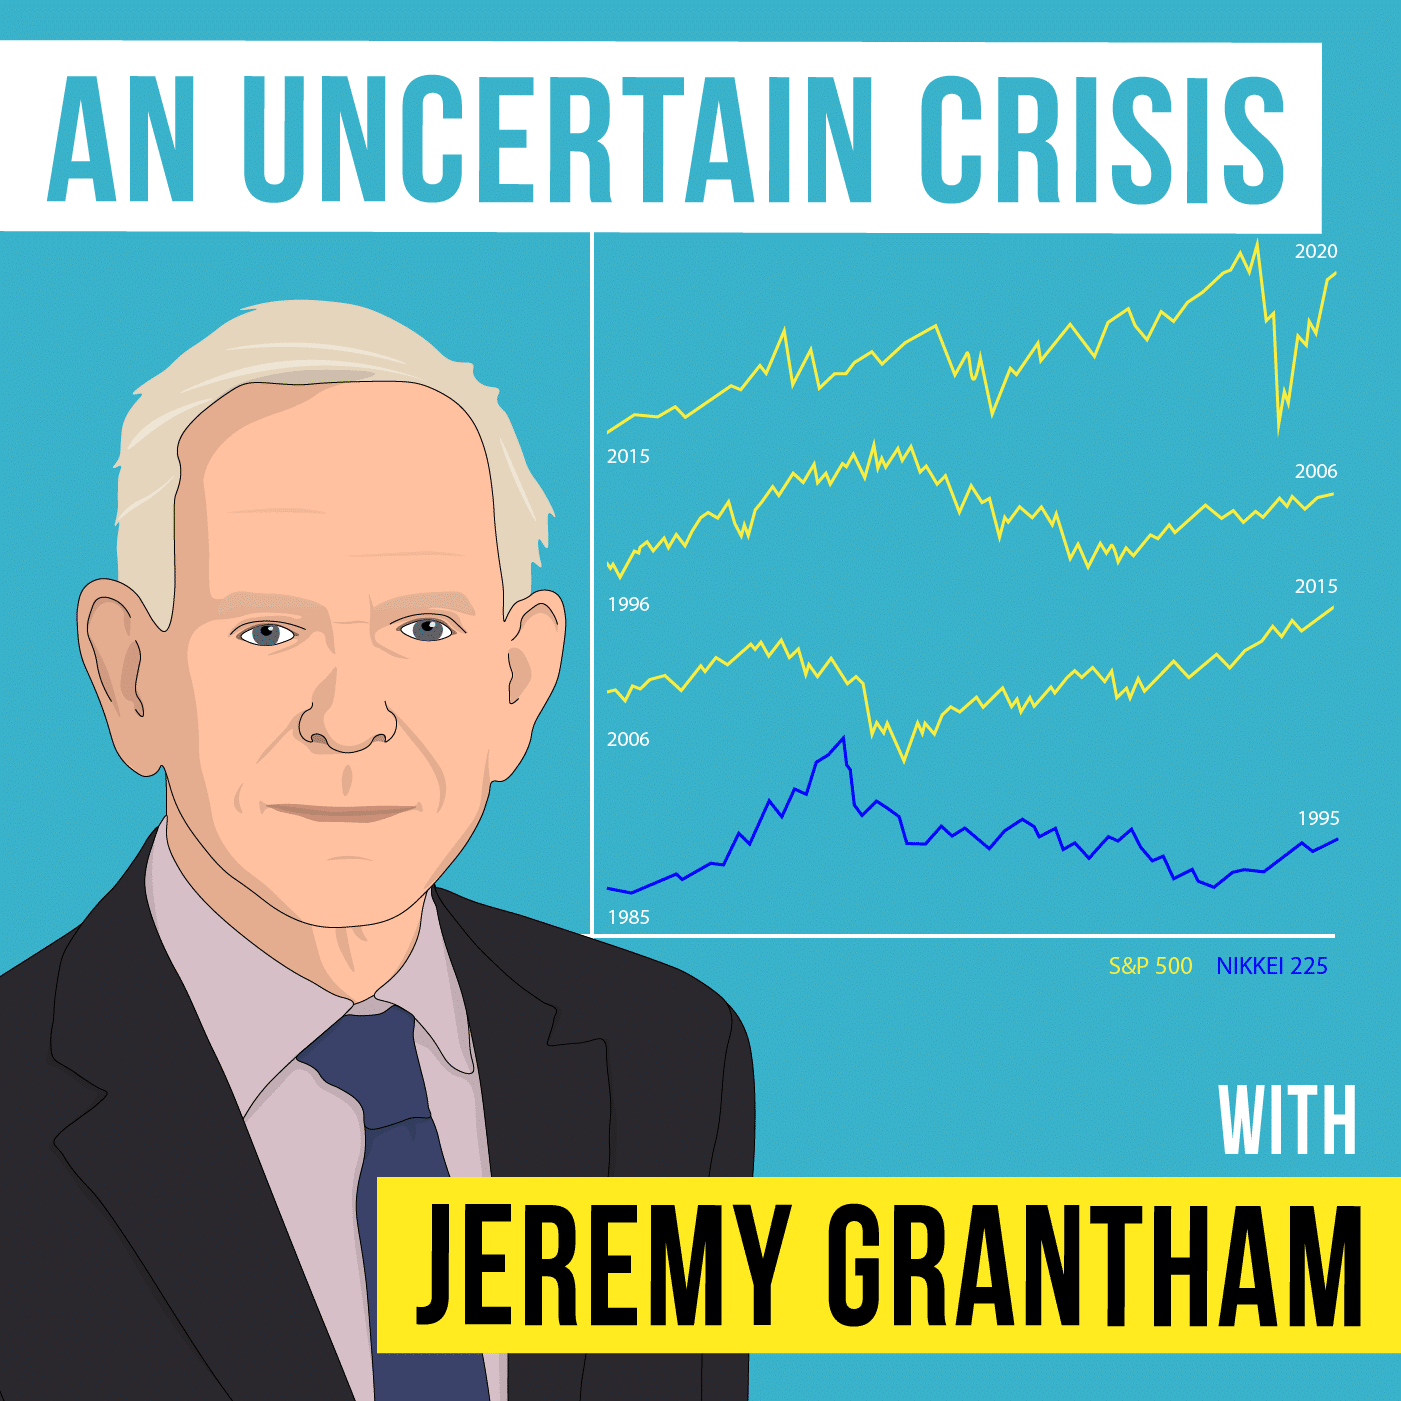 Listen to Jeremy Grantham explain the slow death of value investing